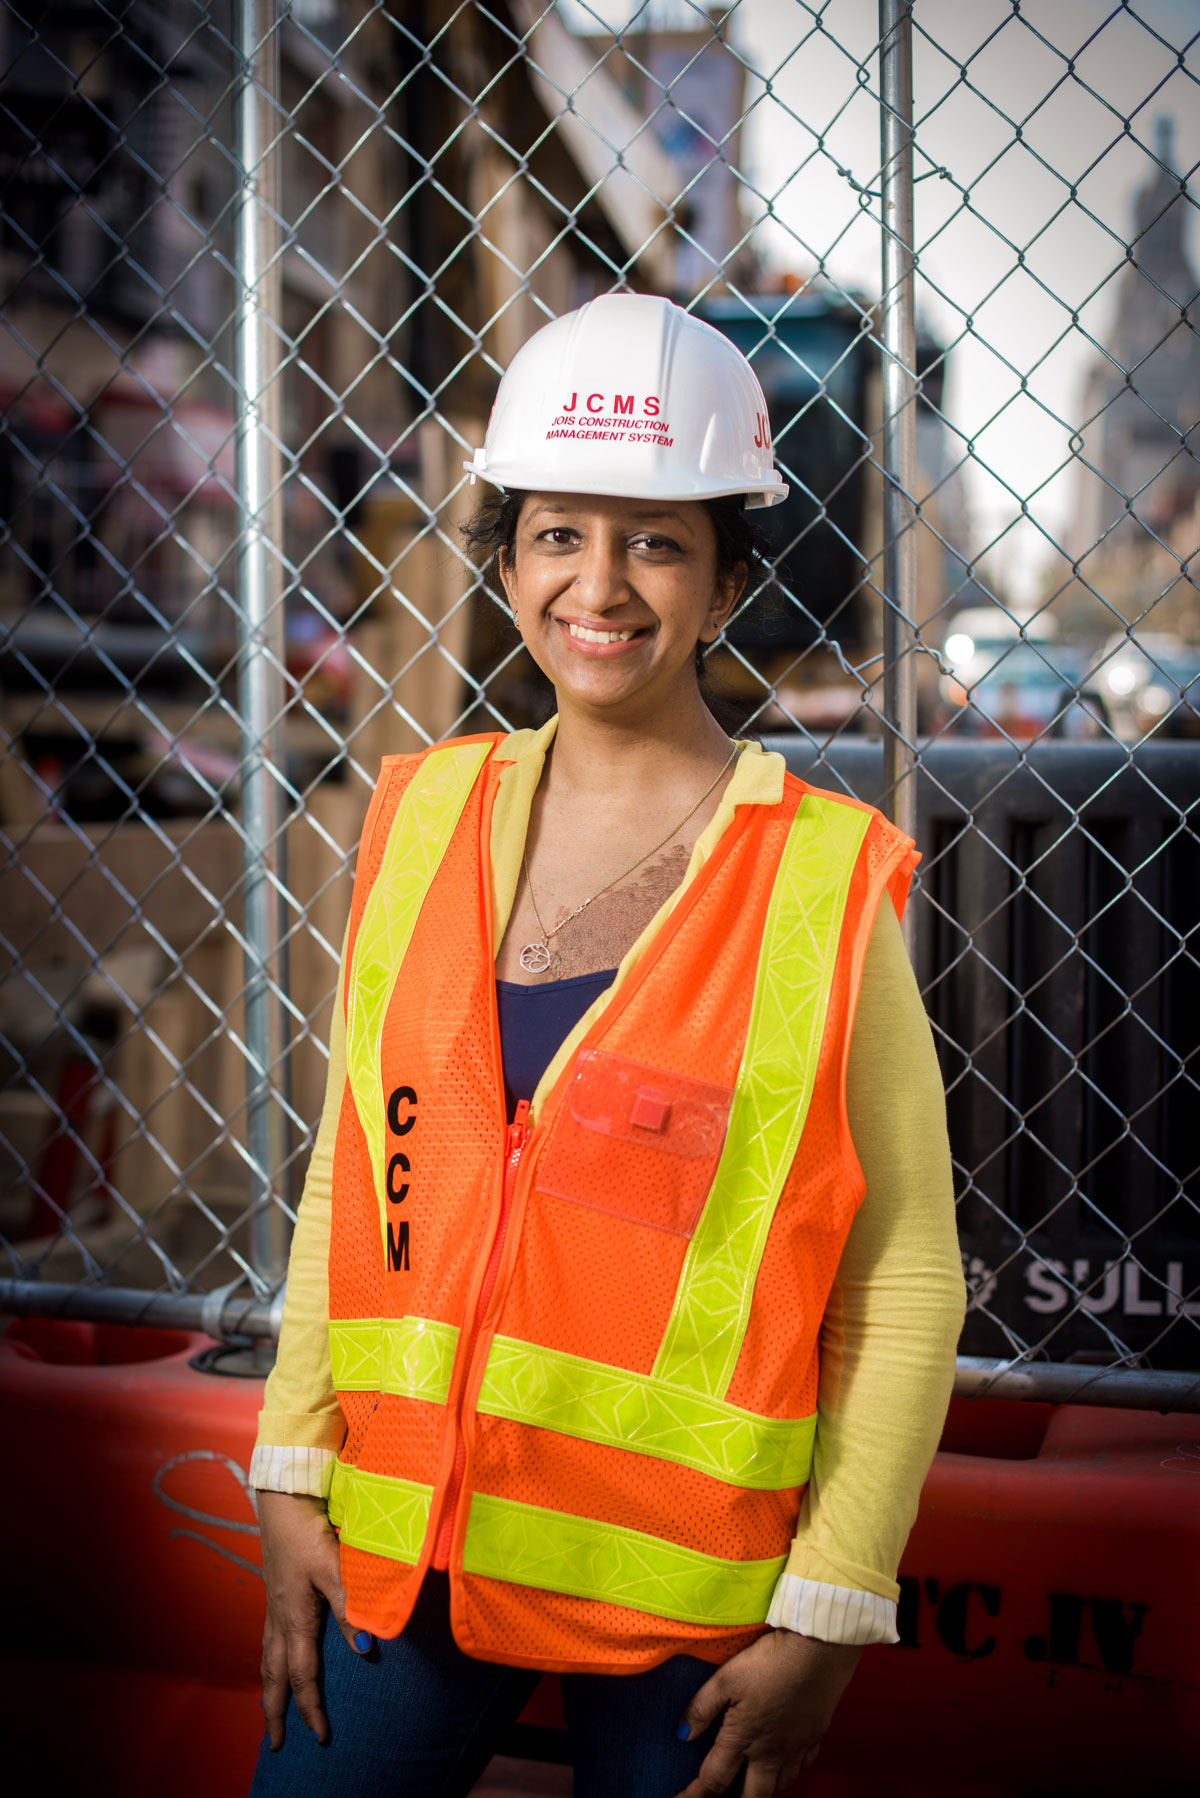 A woman wearing a hard hat and orange vest in front of a construction site.